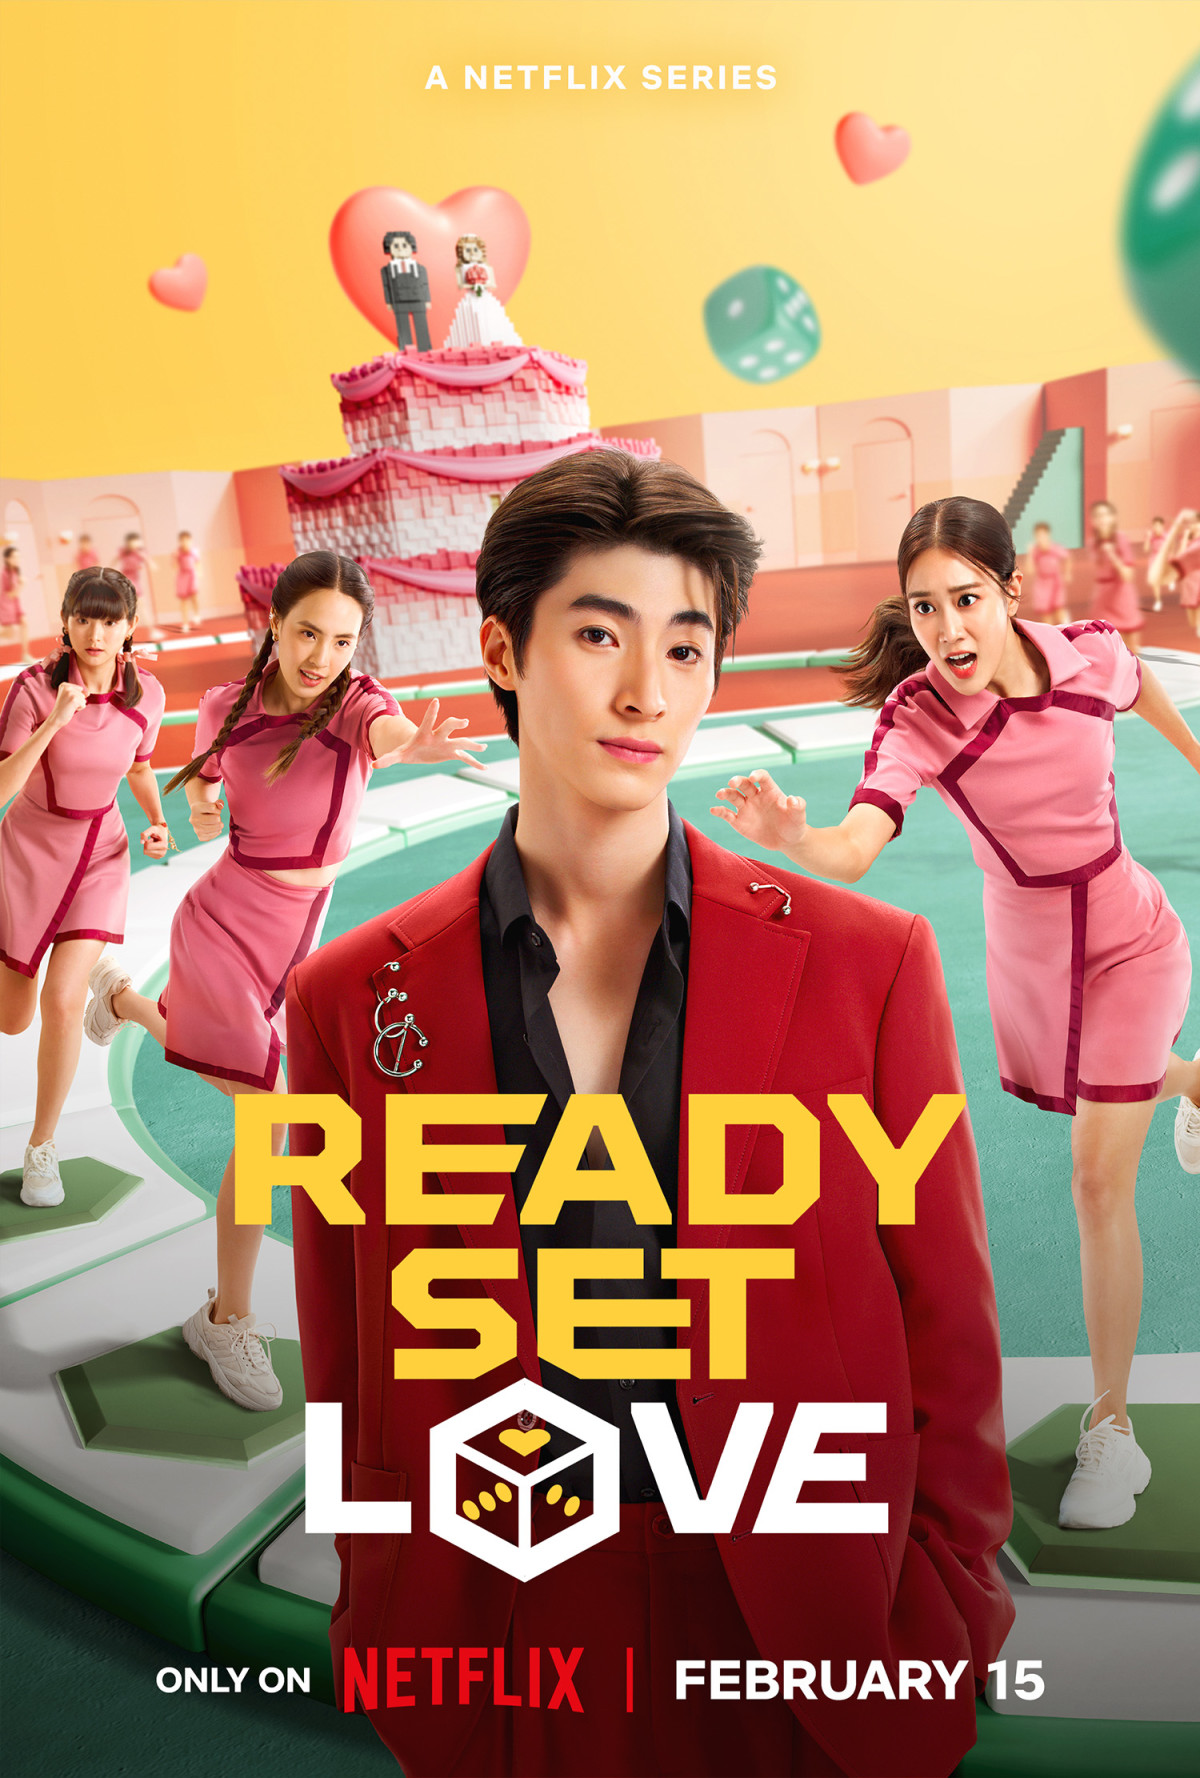 Love is a Game: Colorful Thai Rom-Com 'Ready, Set, Love' Premieres February  15 - About Netflix